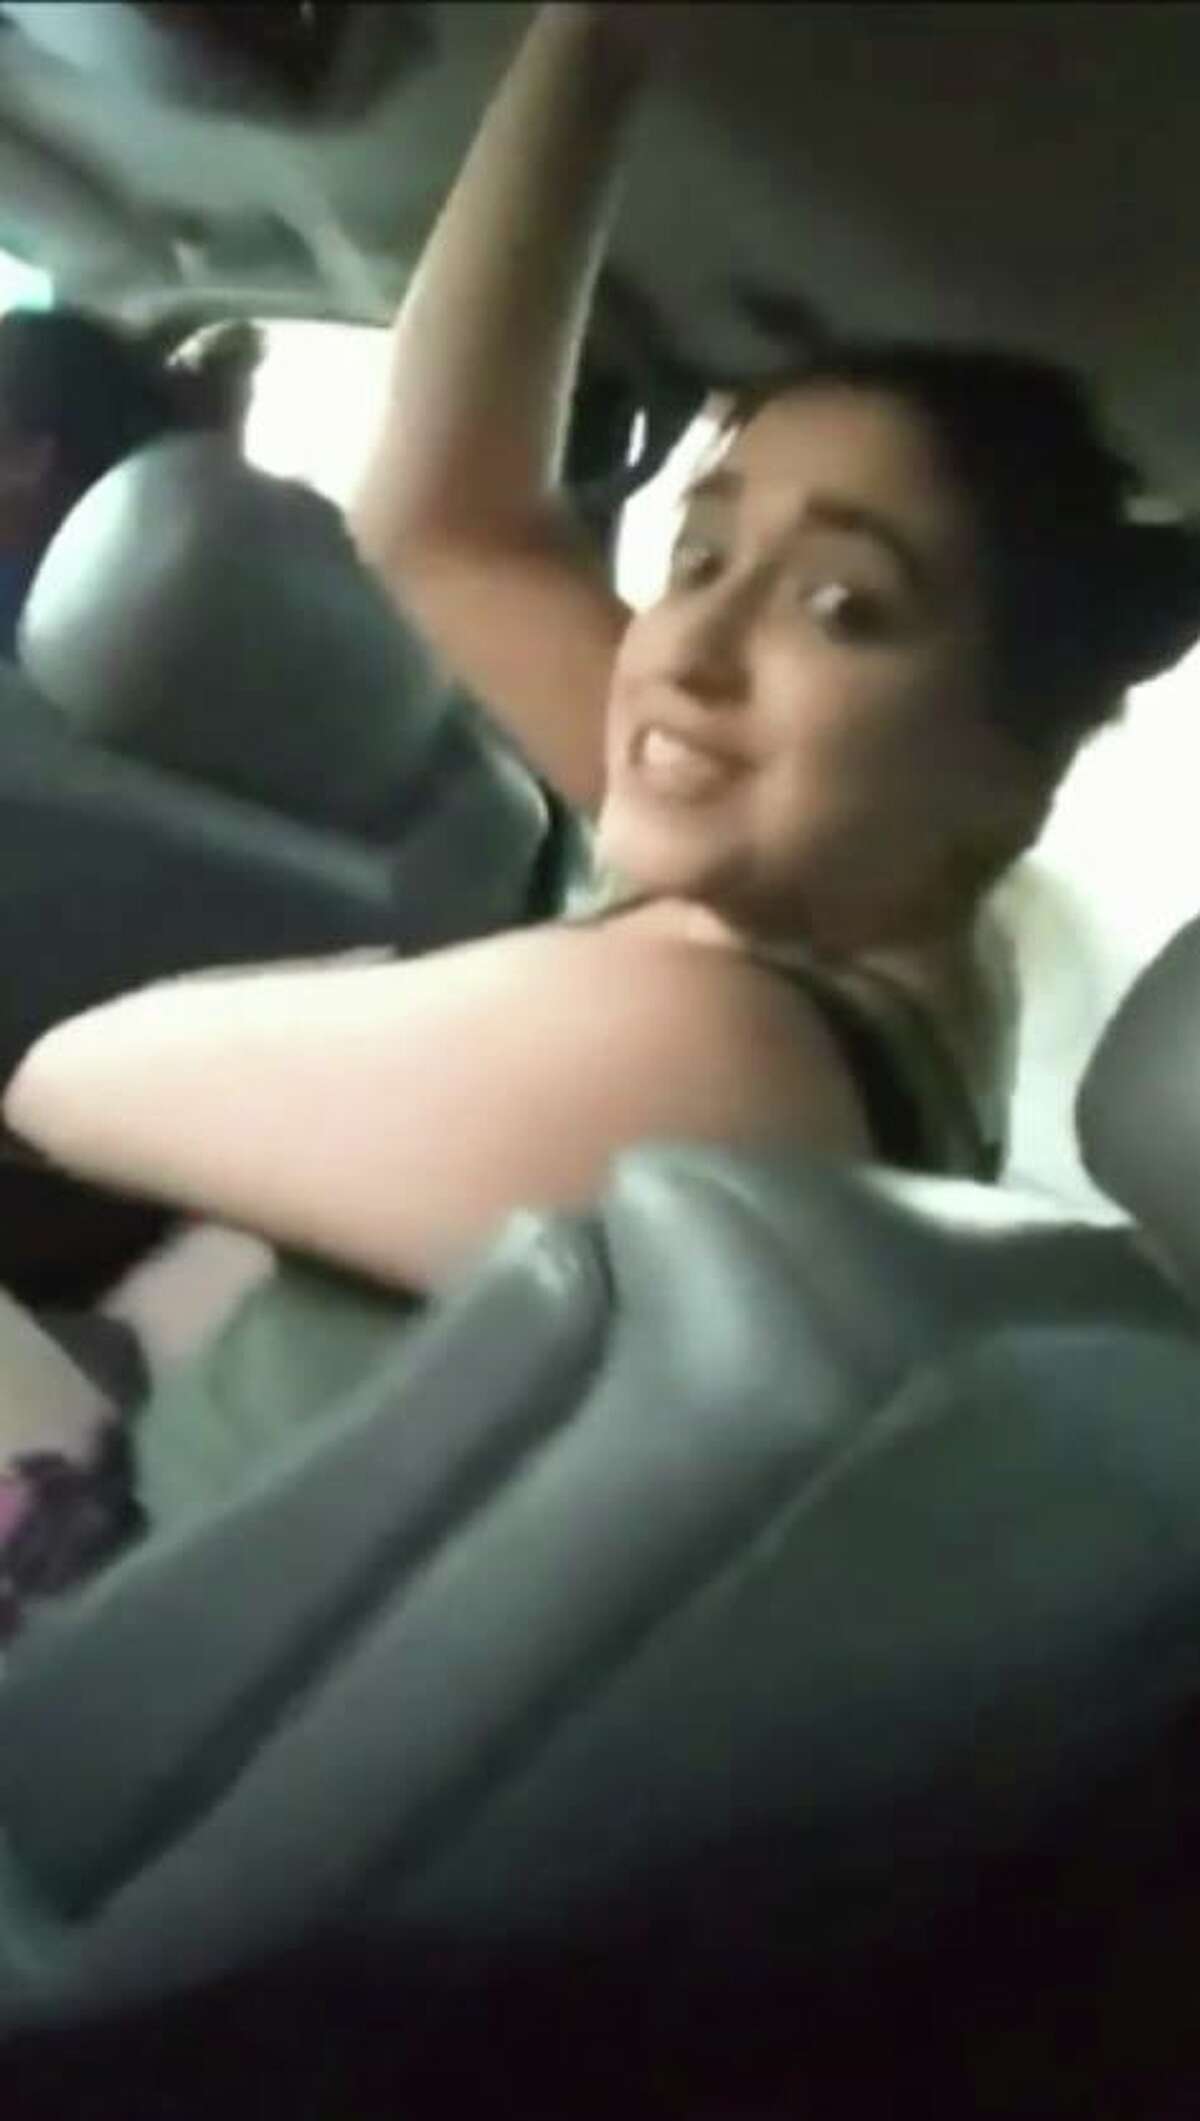 Laredo police said this woman is wanted for questioning pertaining to an assault case.